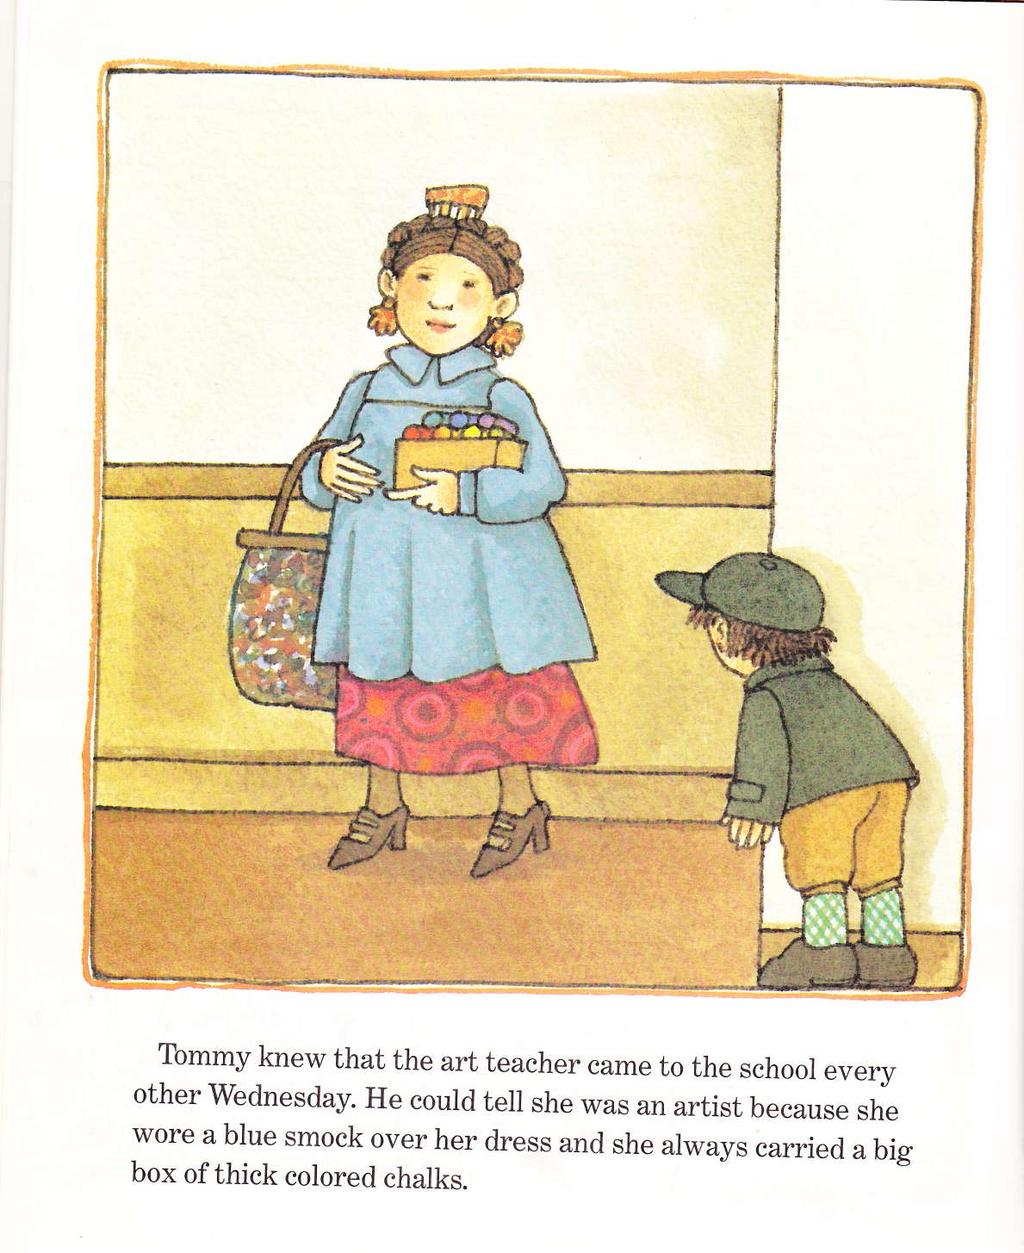 Tommy knew that the art teacher came to the school every other Wednesday.